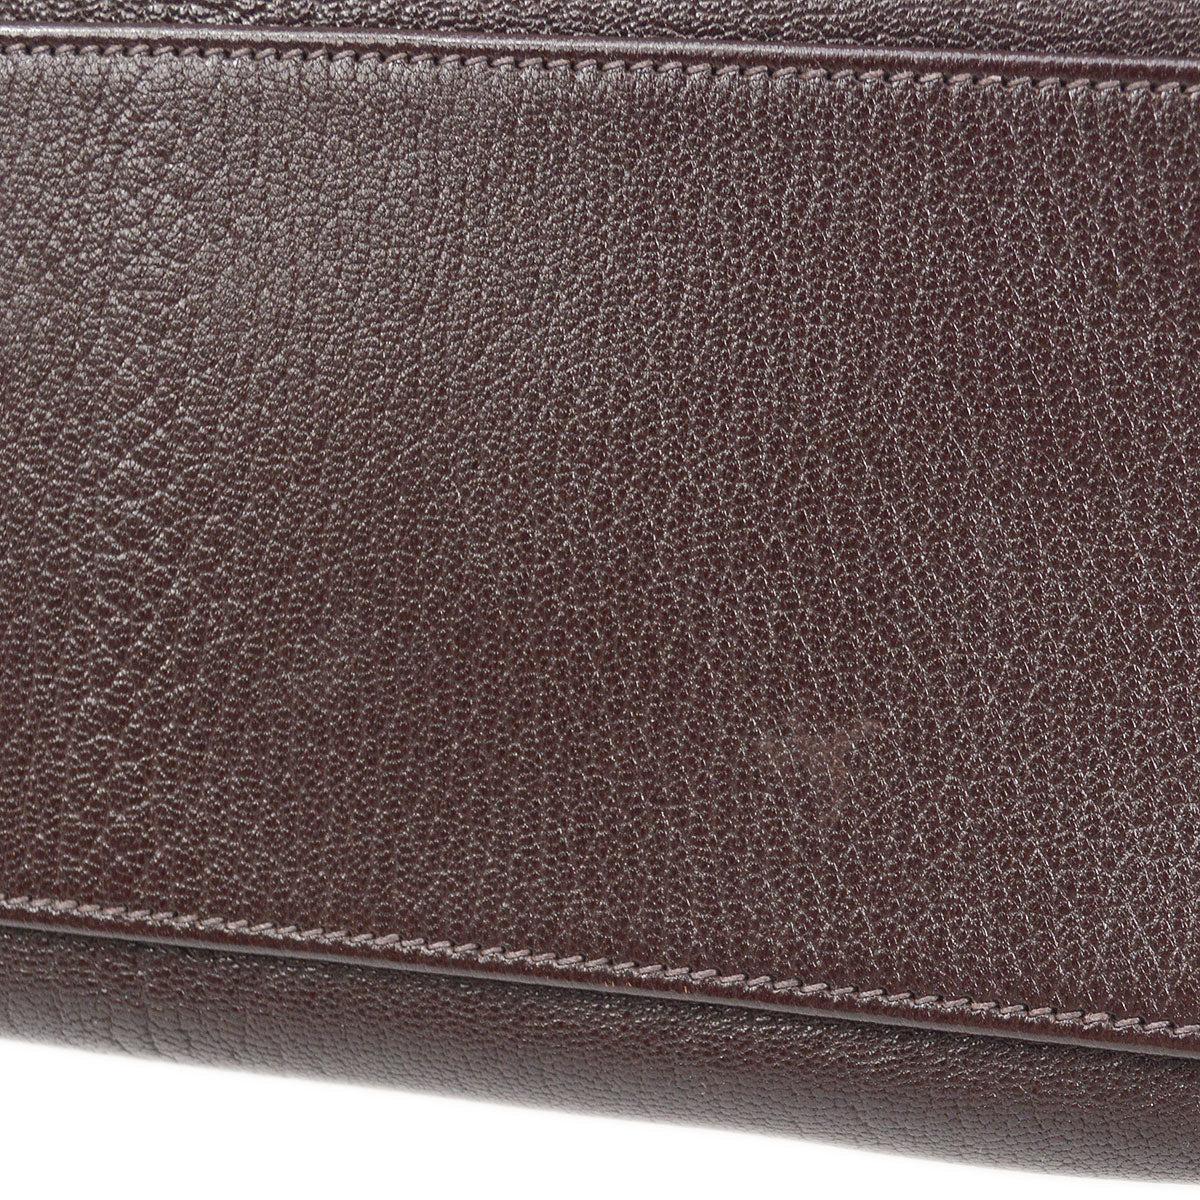 fbb leather